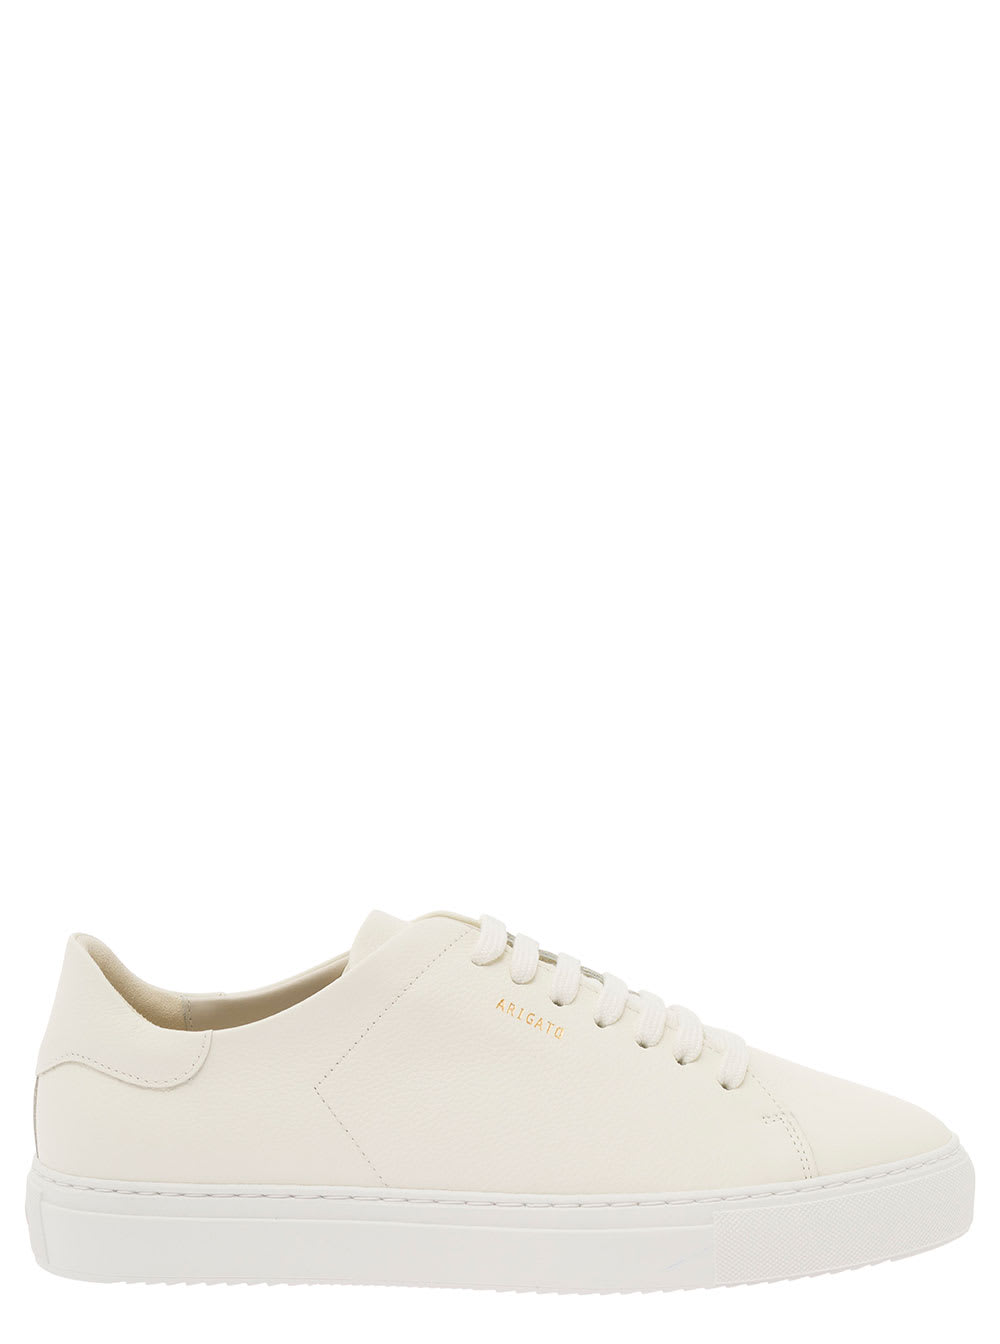 AXEL ARIGATO CLEAN 90 WHITE LOW TOP SNEAKERS WITH LAMINATED LOGO IN LEATHER MAN